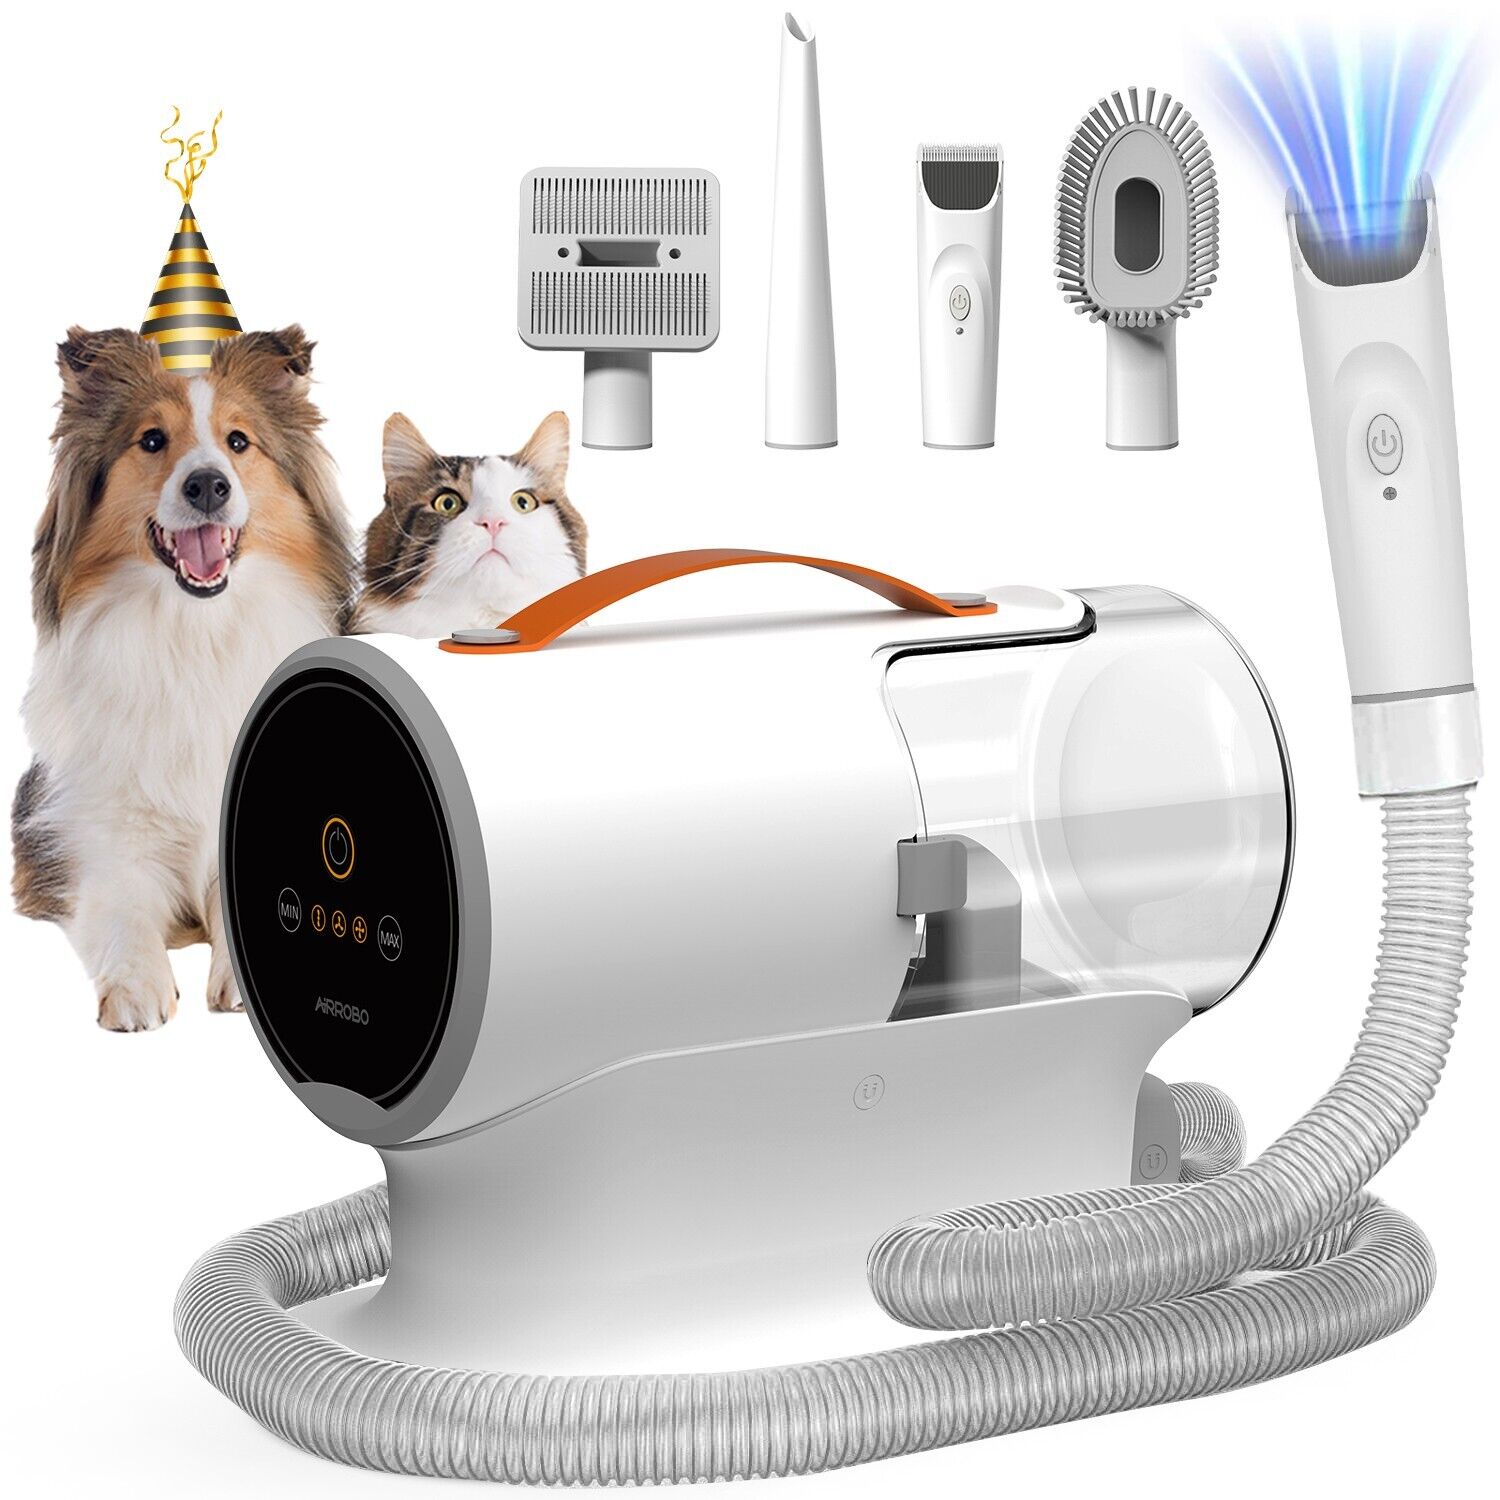 AIRROBO PG100 Pet Grooming Vacuum with 5 Grooming Tools, 12000Pa Suction Power